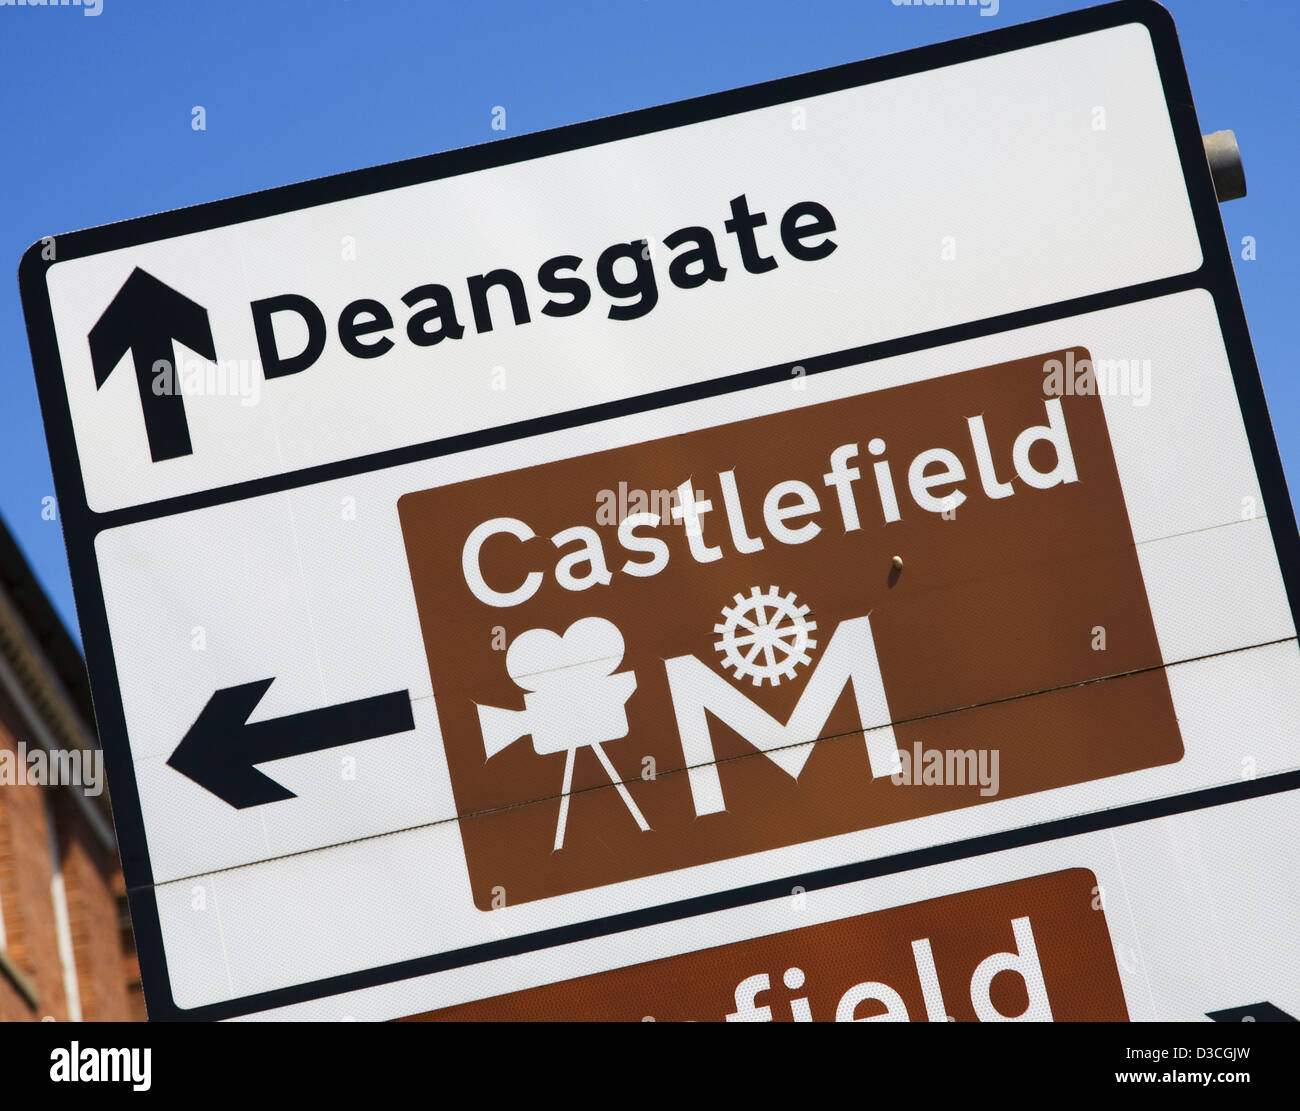 Deansgate And Castlefield Street Sign, Manchester, Uk, Europe Stock Photo